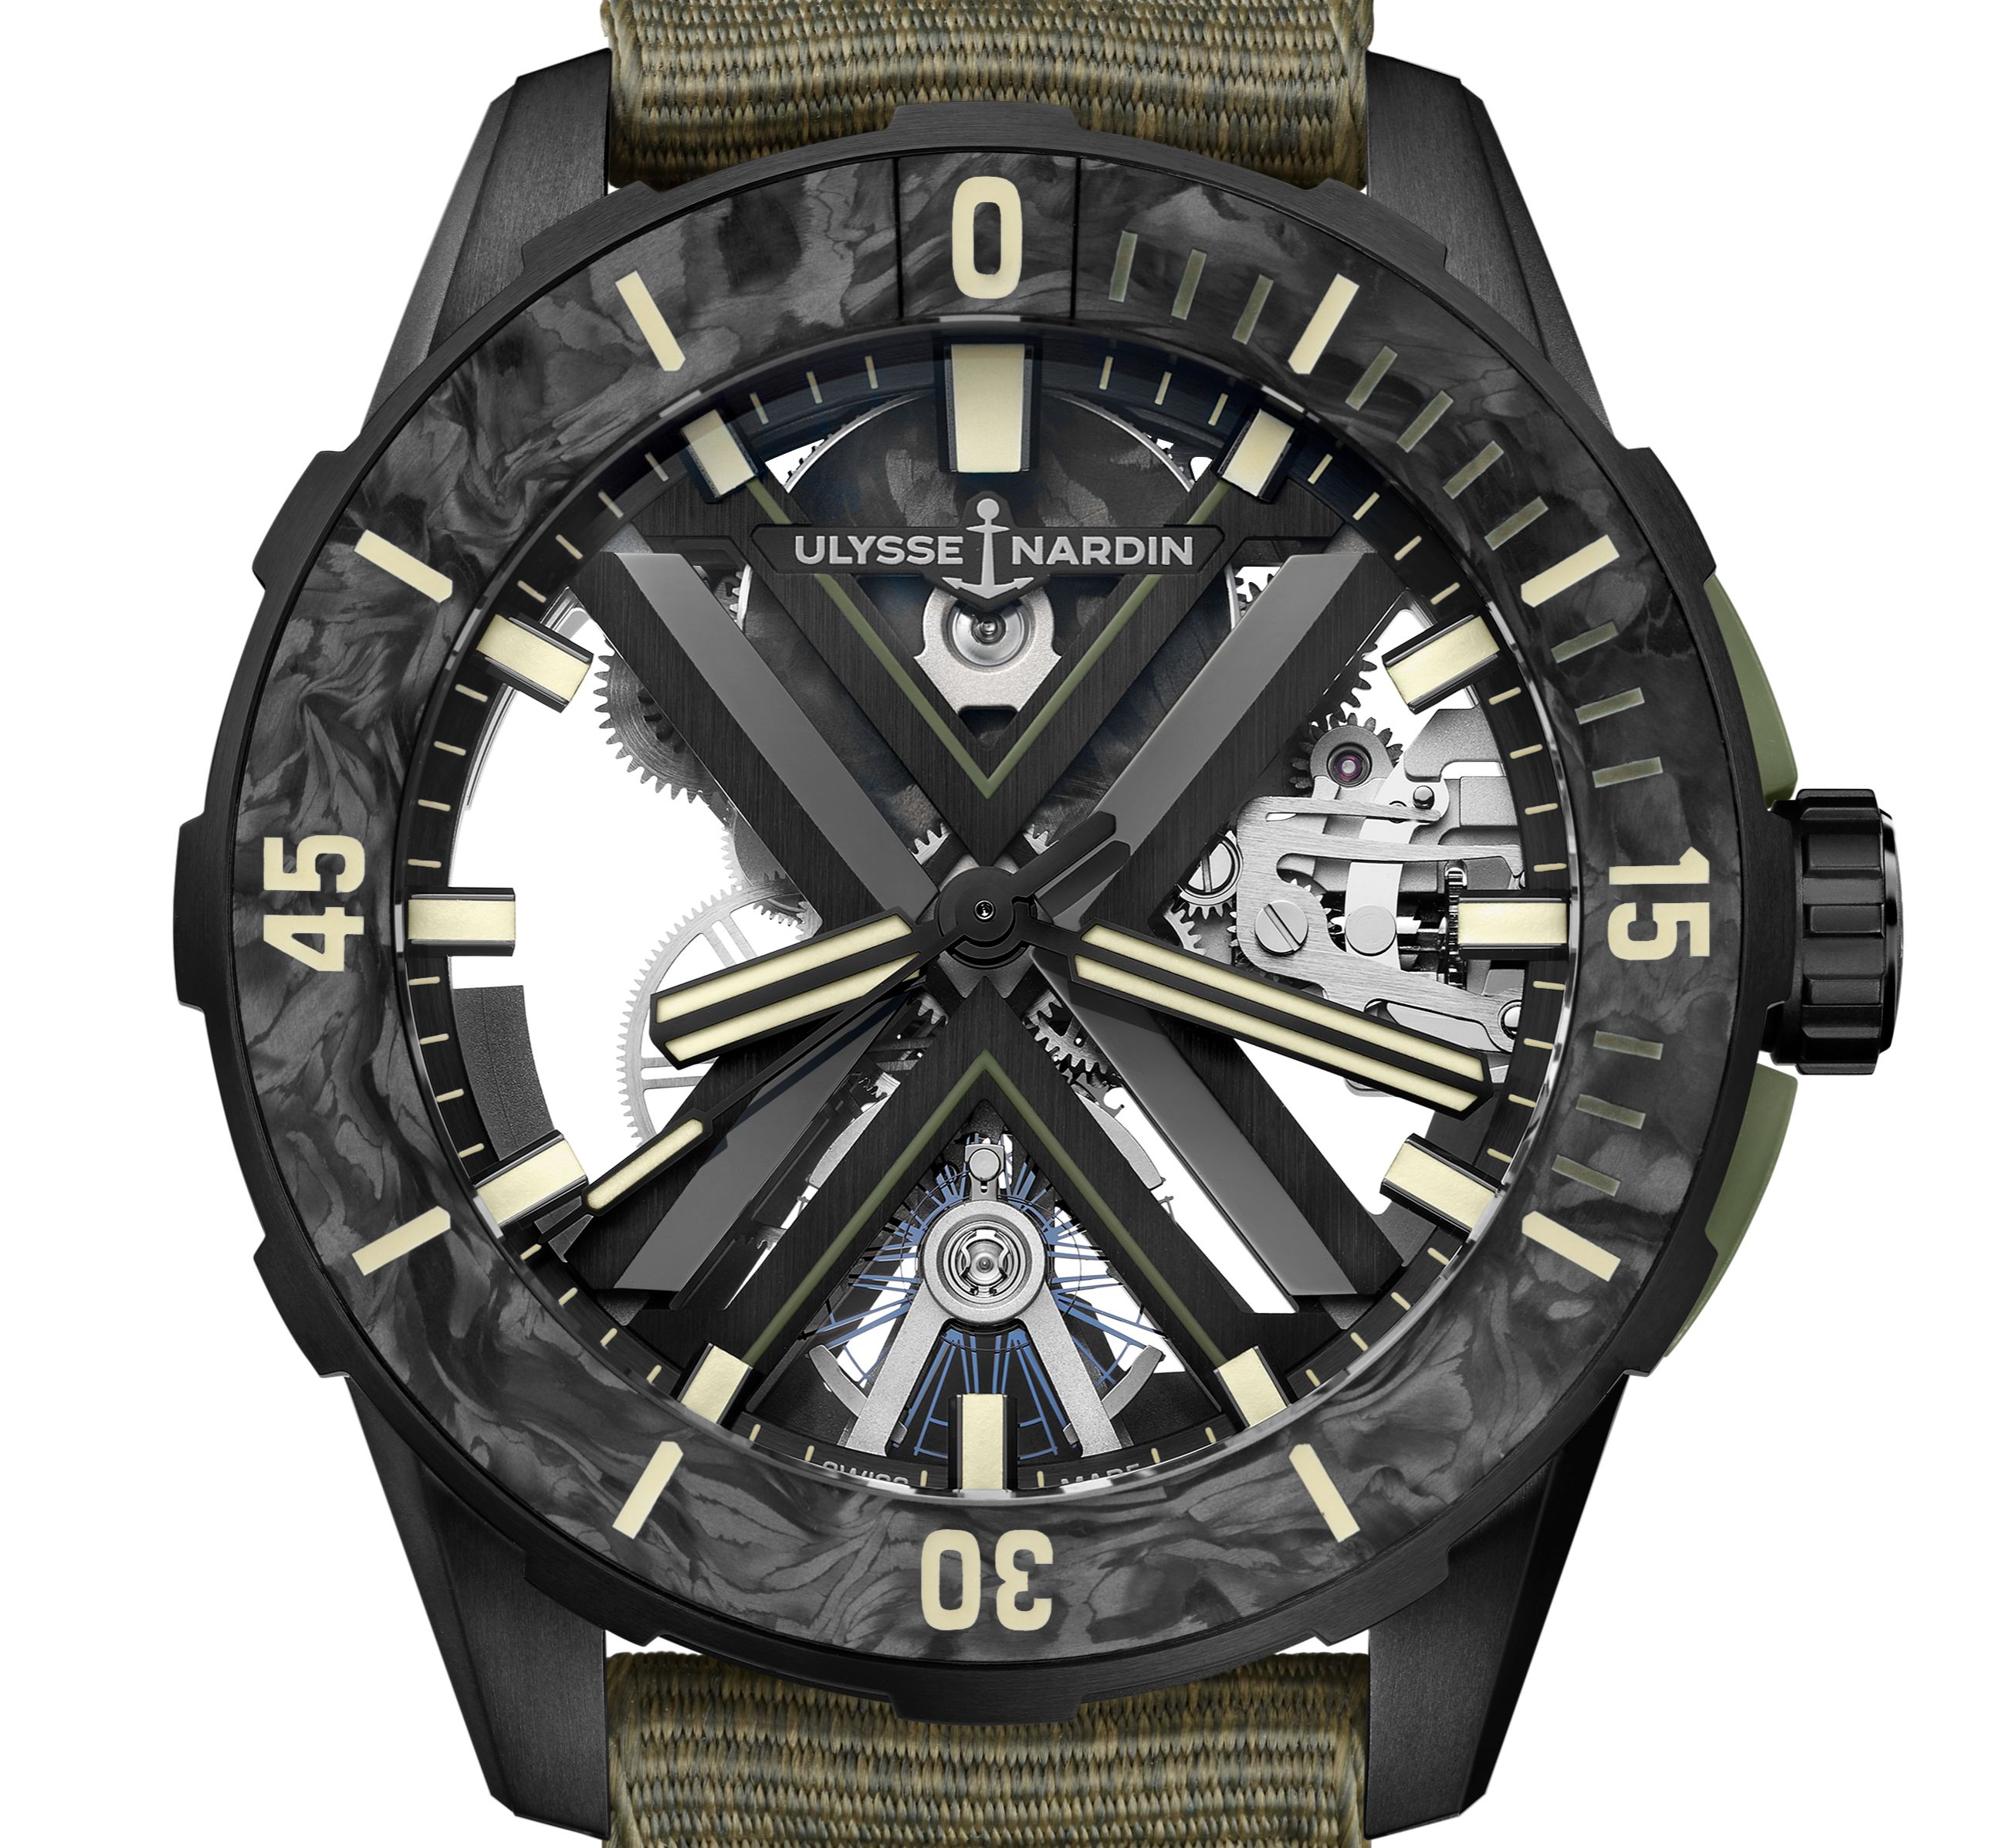 The dial of the Diver X Skeleton OPS